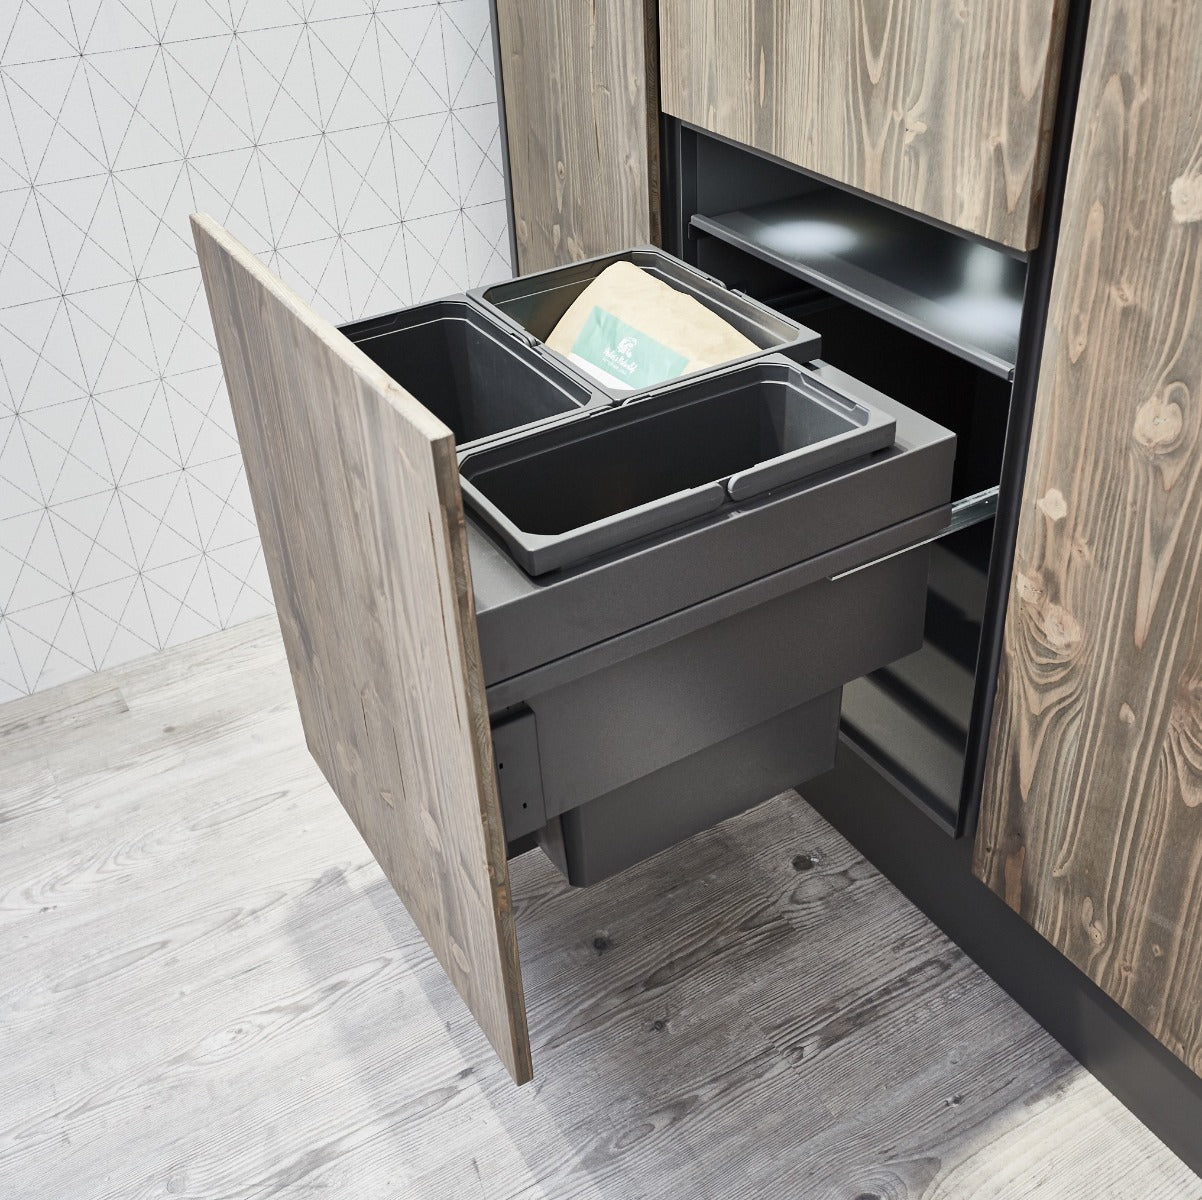 Vauth-Sagel pull-out integrated kitchen bin in lava grey with three compartments, ideal for separating waste and recycling